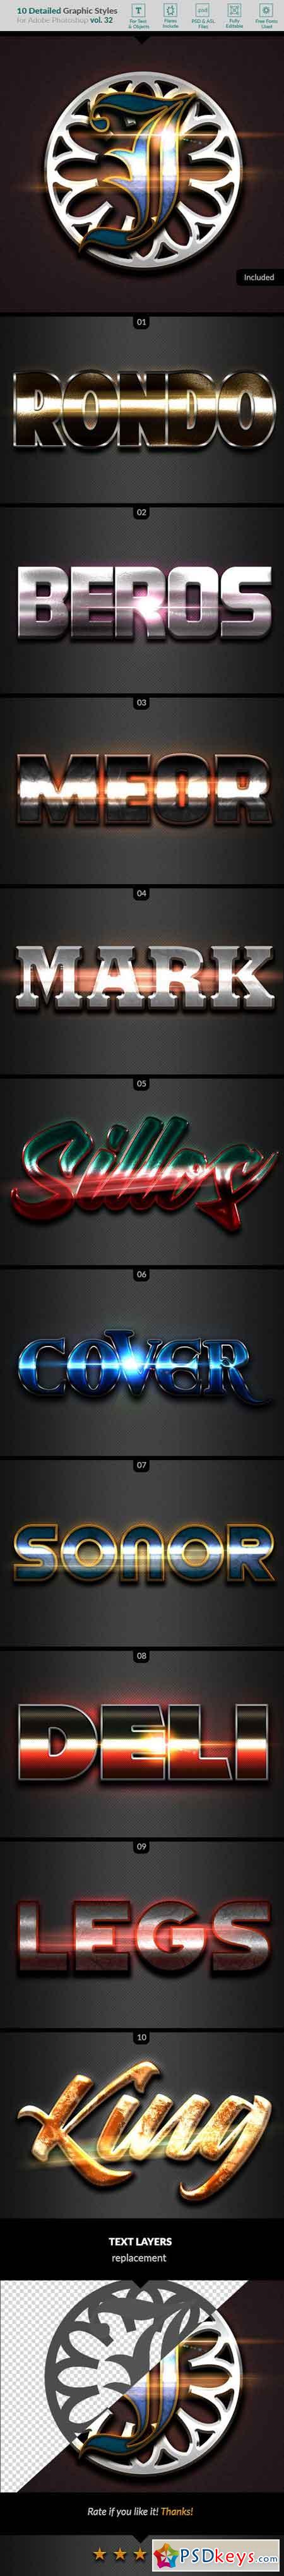 10 Text Effects Vol 32 22988807